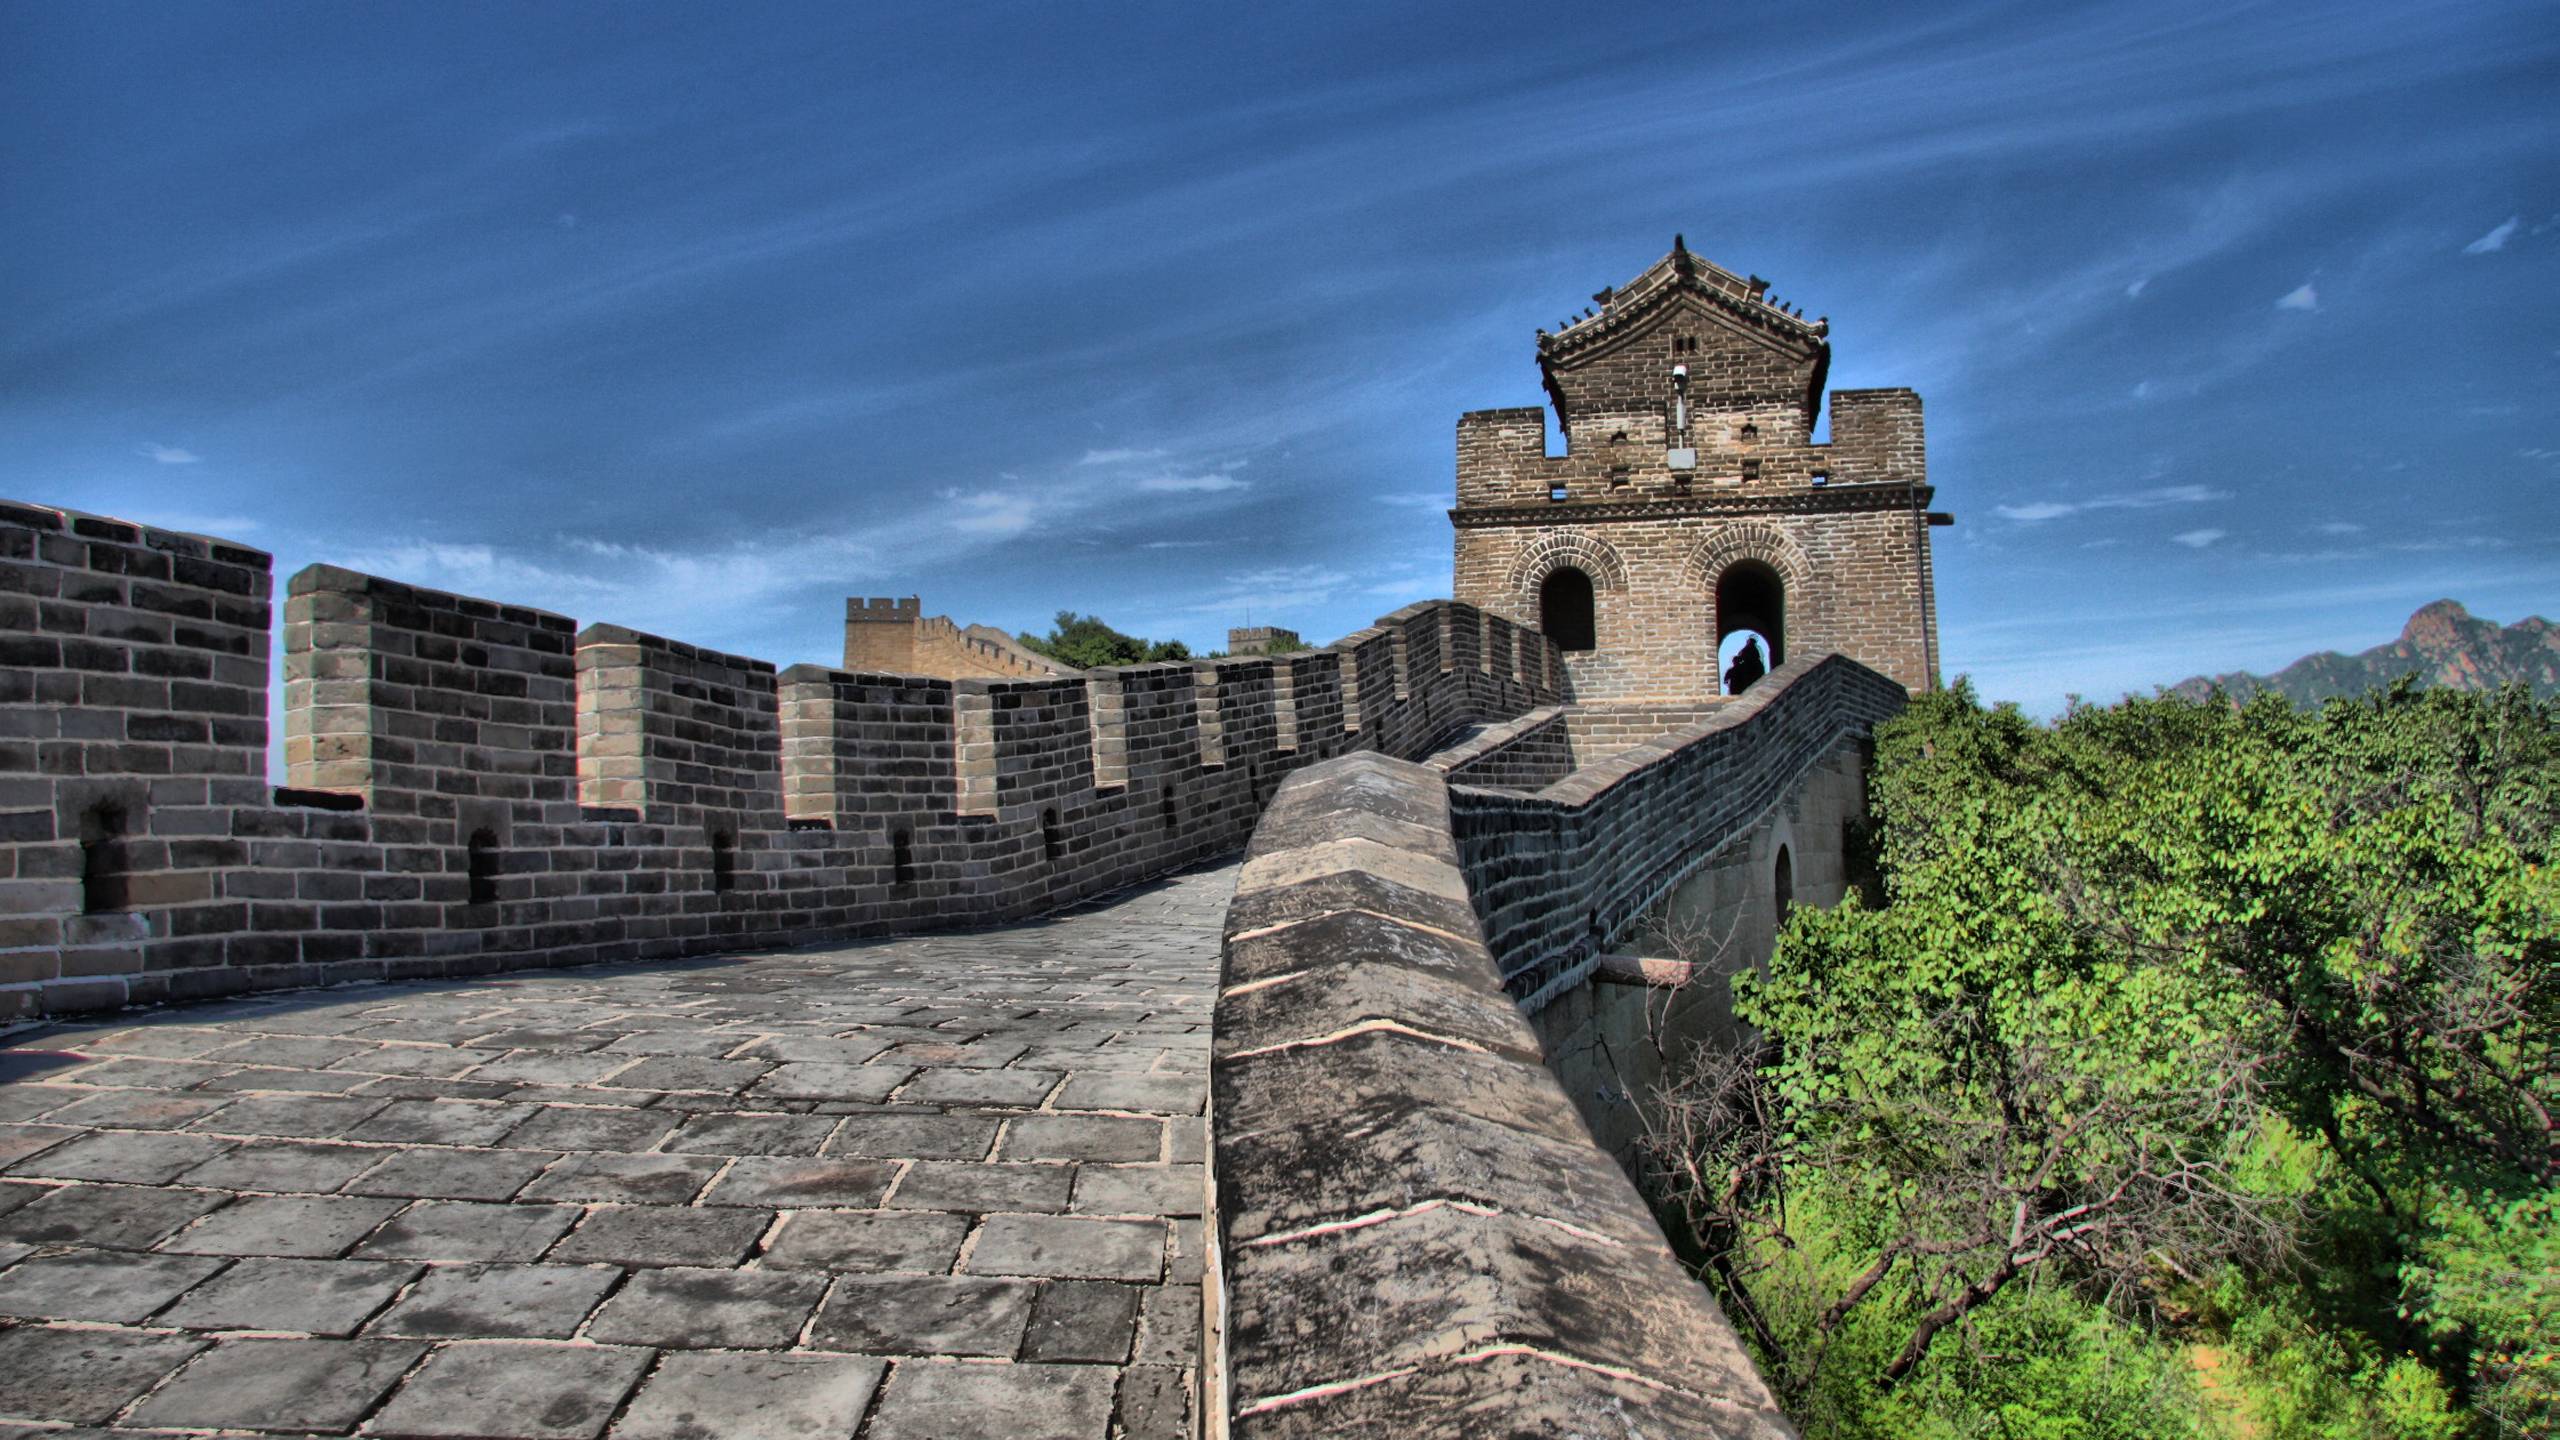 great wall beijing china wallpaper Search Engine